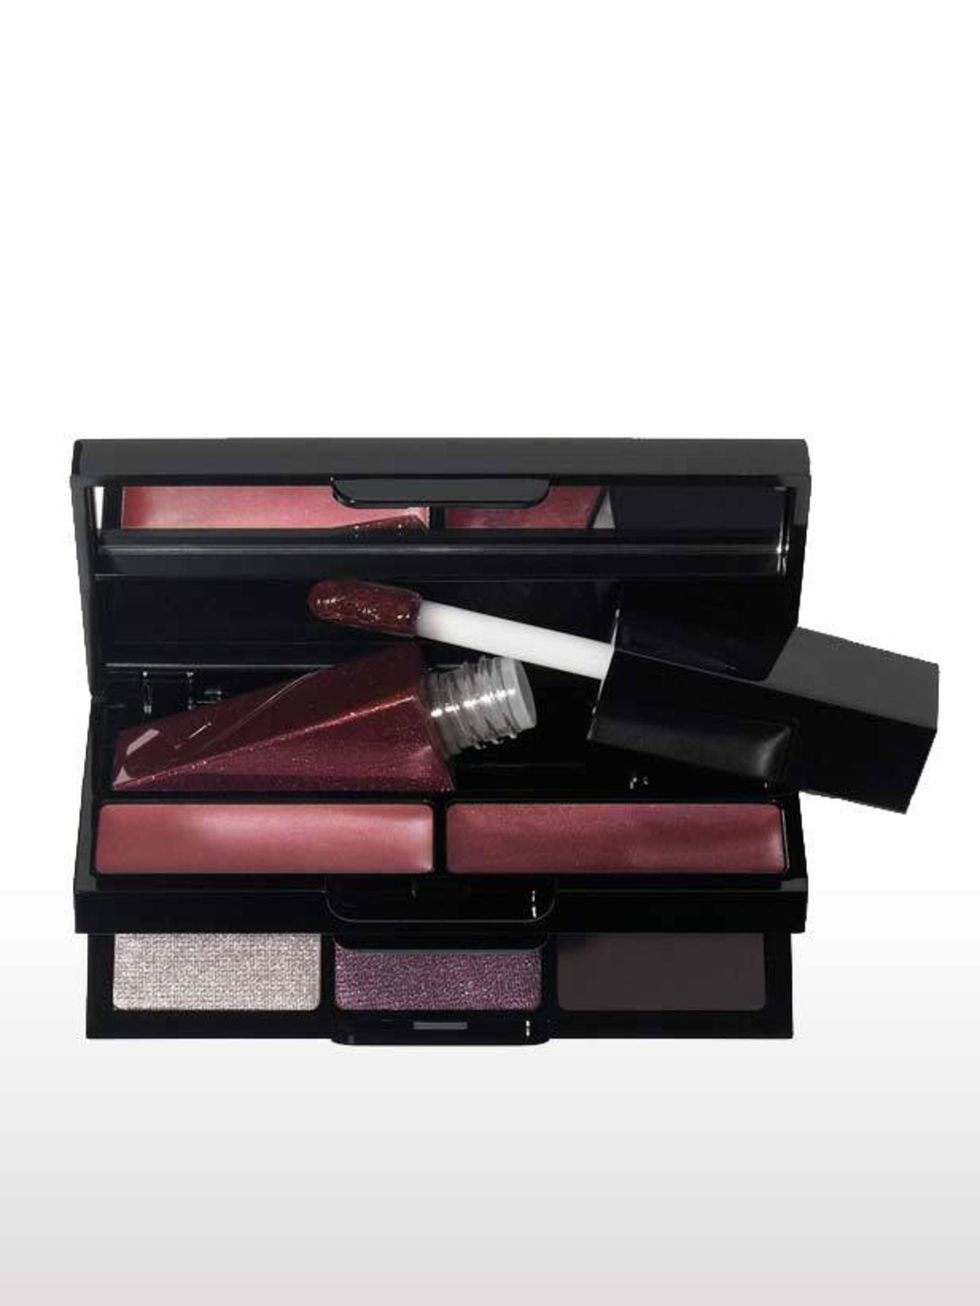 <p>Evening functions are a pre-requisite of fashion week so thank god for this mini kit that includes three eyeshadows for a no-brainer smoky look, as well as plum-toned glosses for instant glamour. Its dinky size means it comes everywhere with me while t